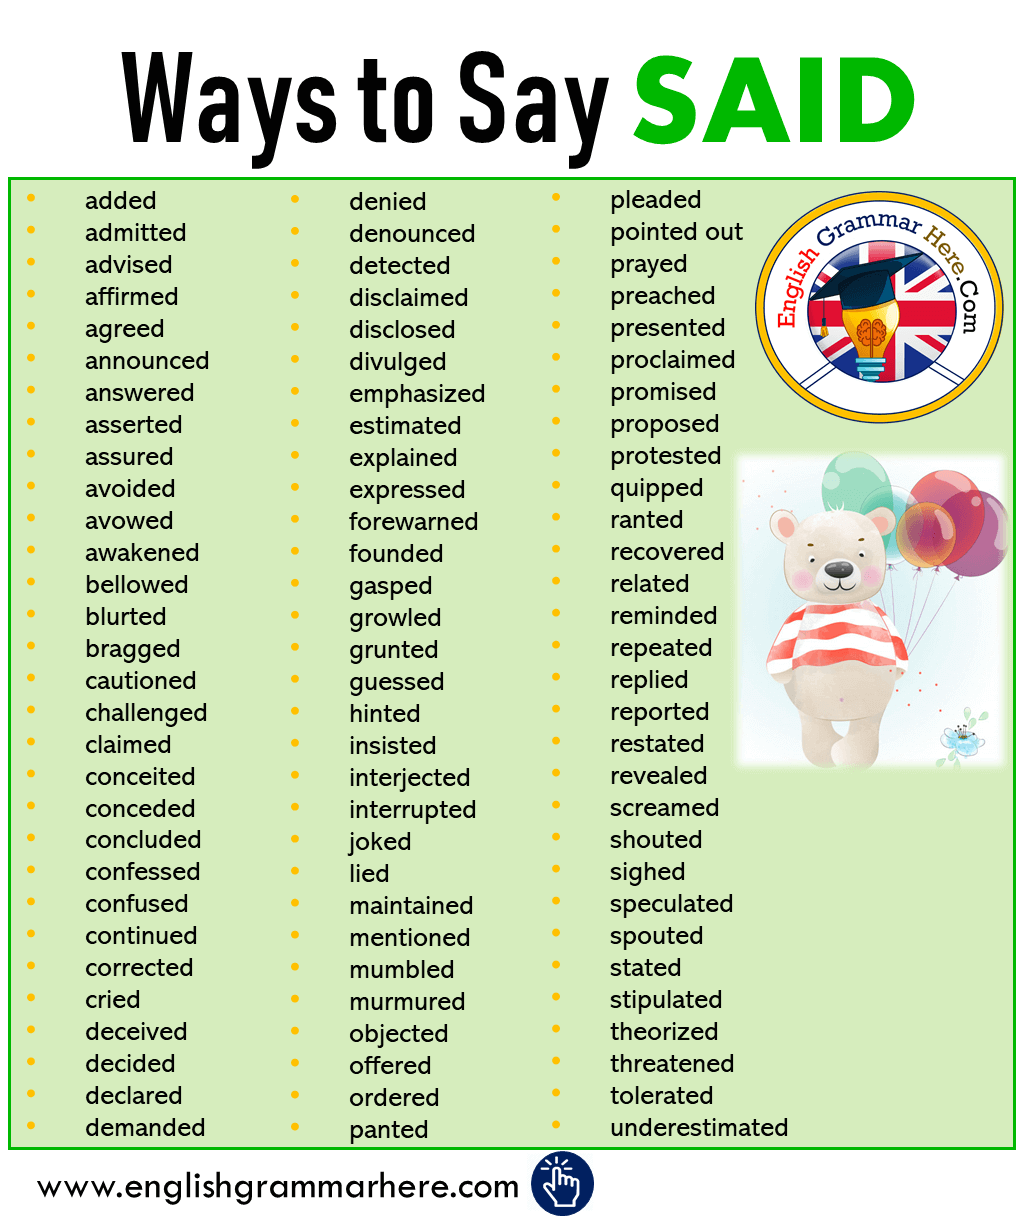 Different Ways to Say SAID in English